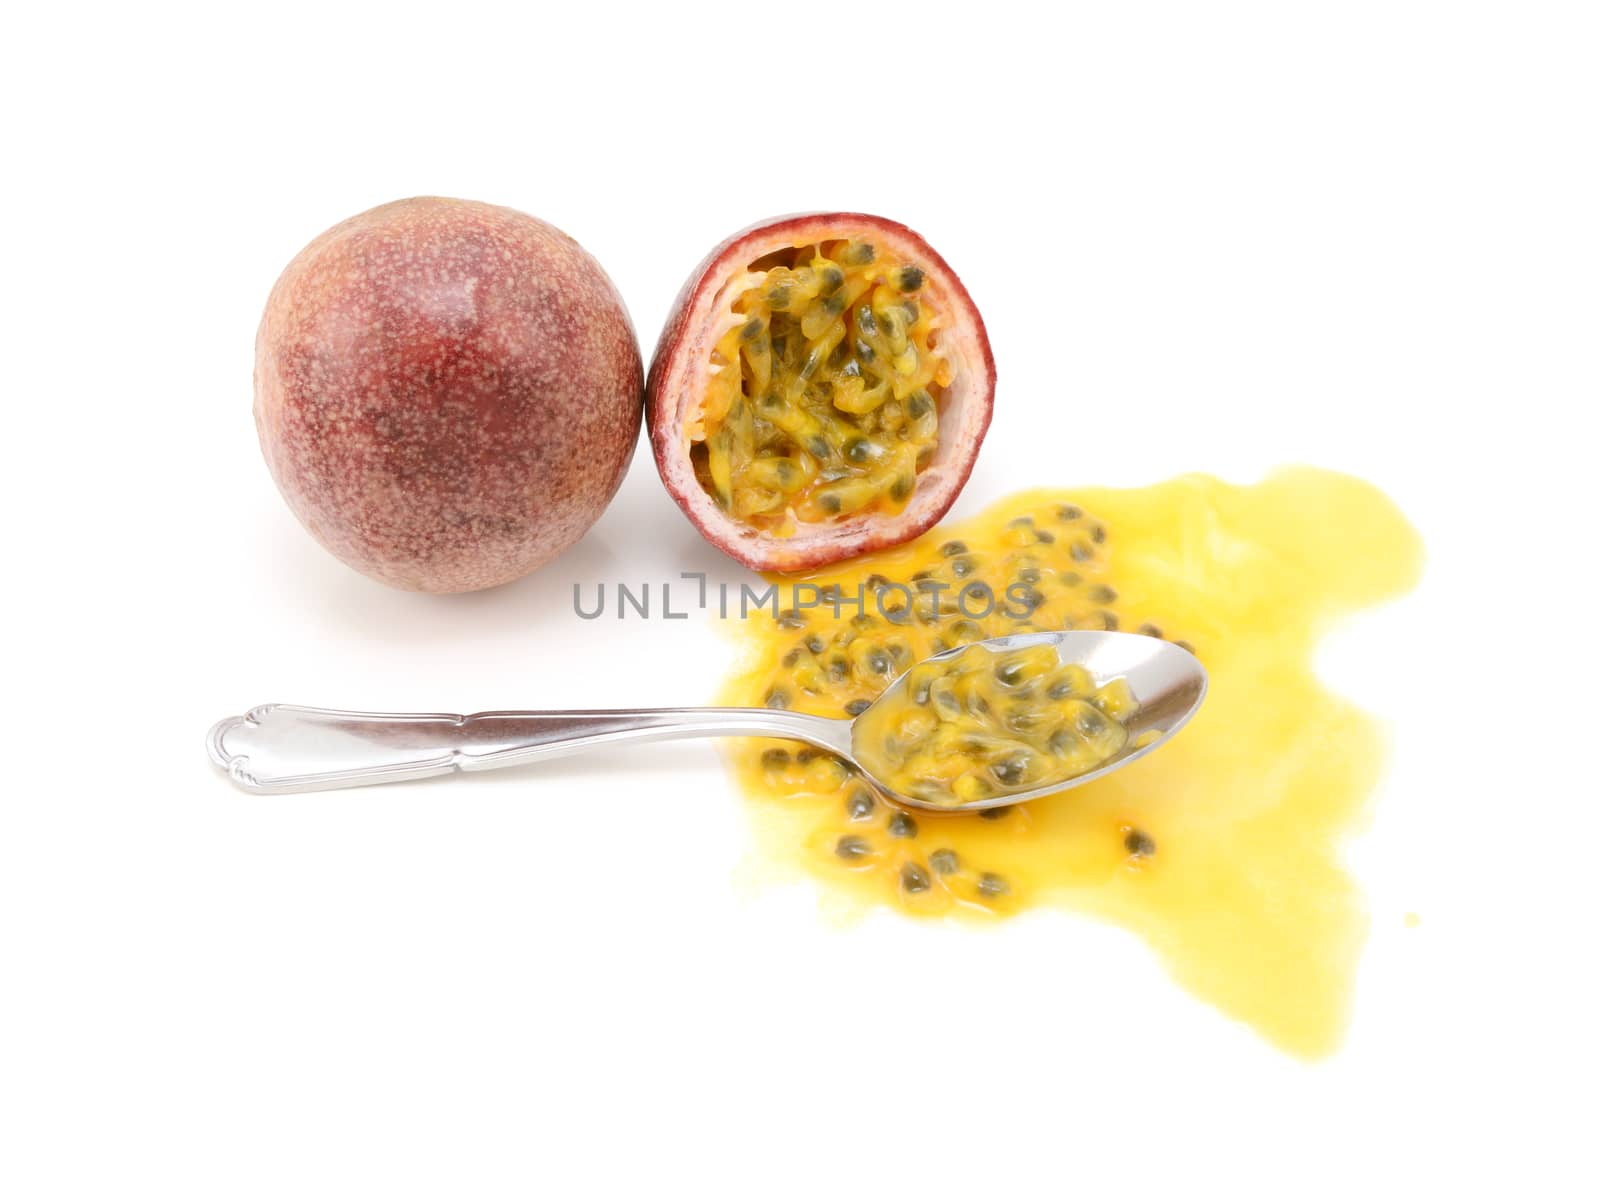 Whole passion fruit and half-eaten cross section with spoon and spilled pulp, on a white background